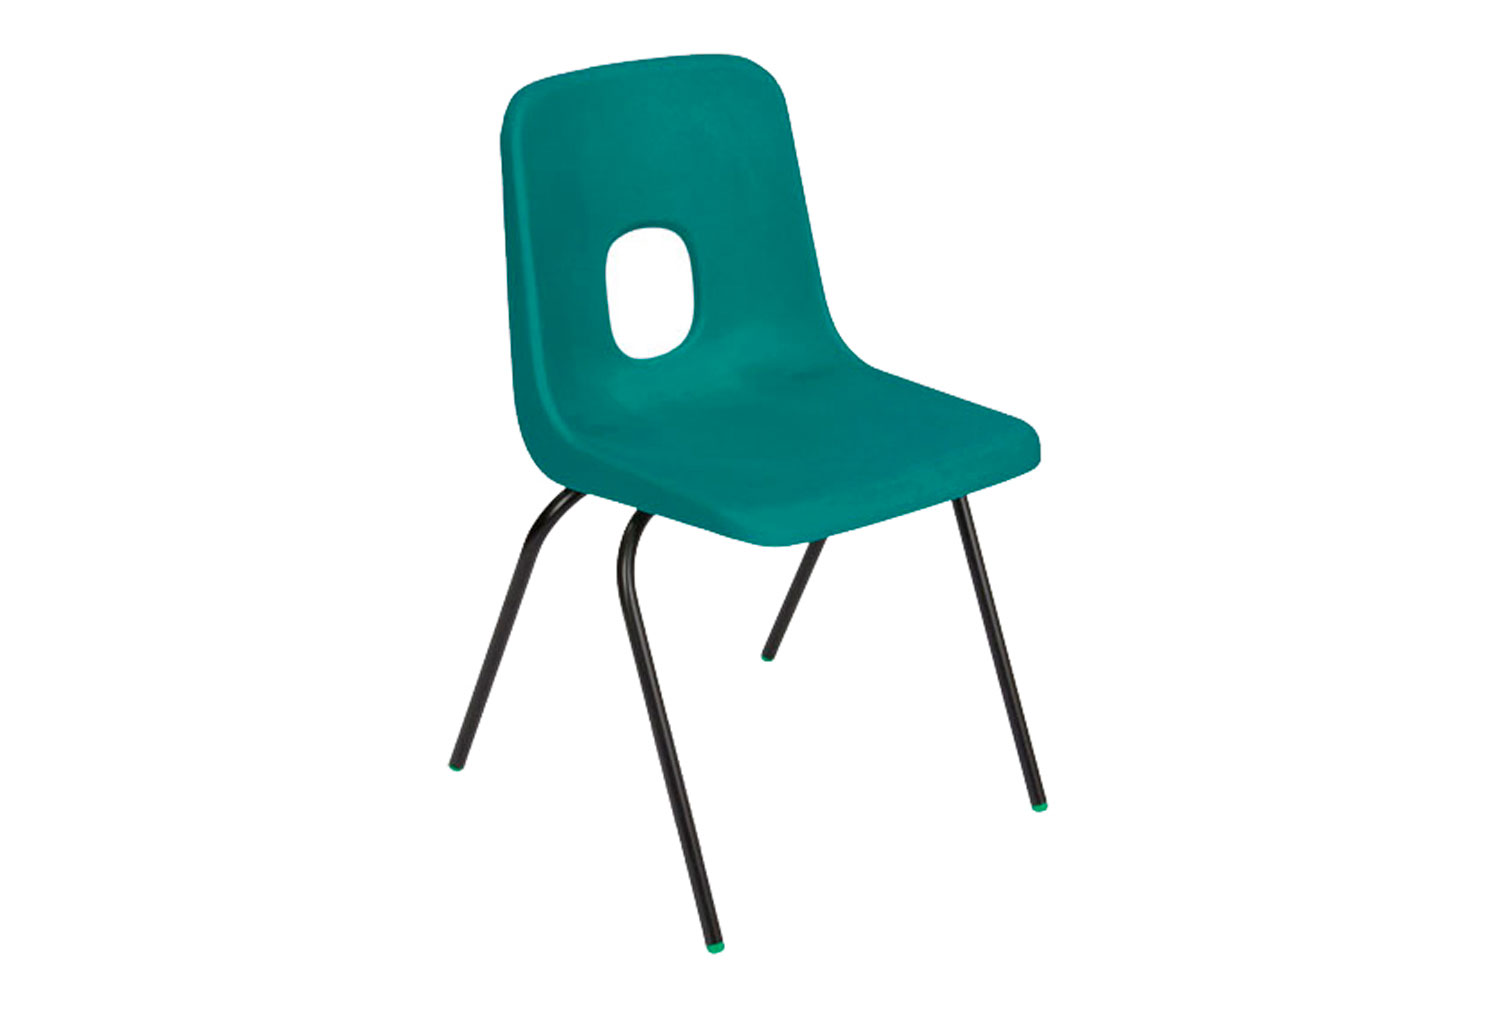 Qty 8 - Hille E Series Classroom Chair, 14+ Years - 41wx37dx46h (cm), Black Frame, Jade